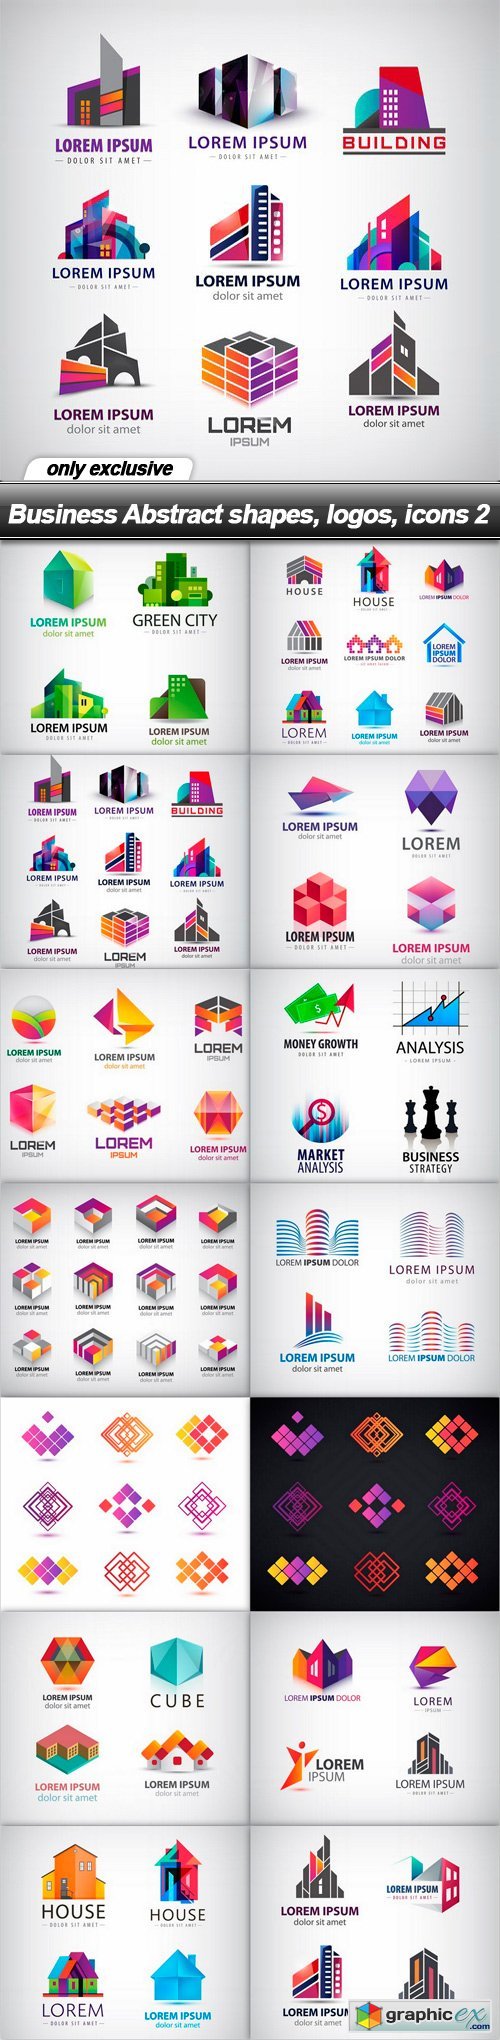 Business Abstract shapes, logos, icons 2 - 14 EPS